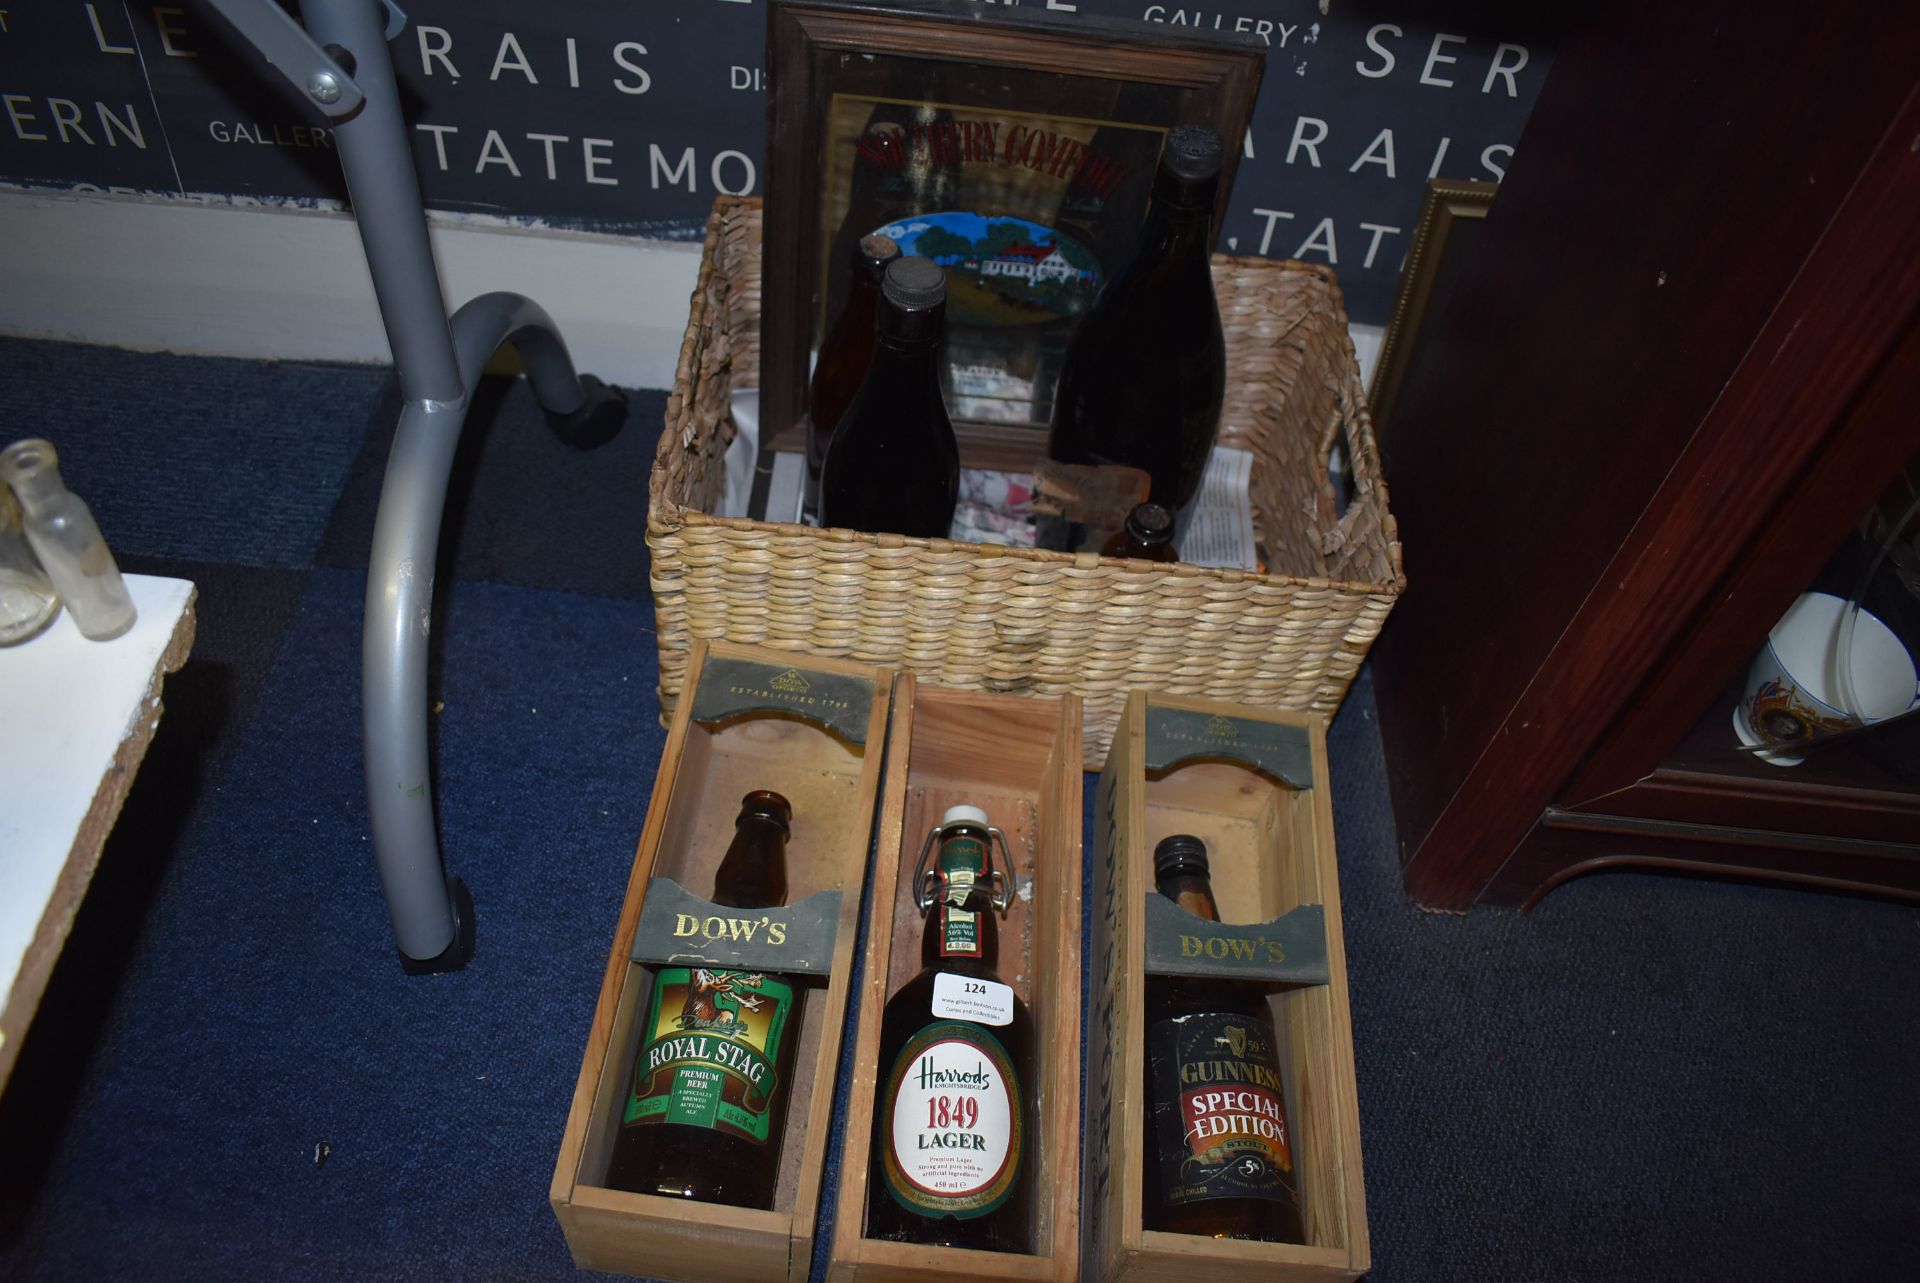 *Display Beer Bottles; Royal Stag, Harrod’s Larger, and Guinness Special Edition, plus a Basket